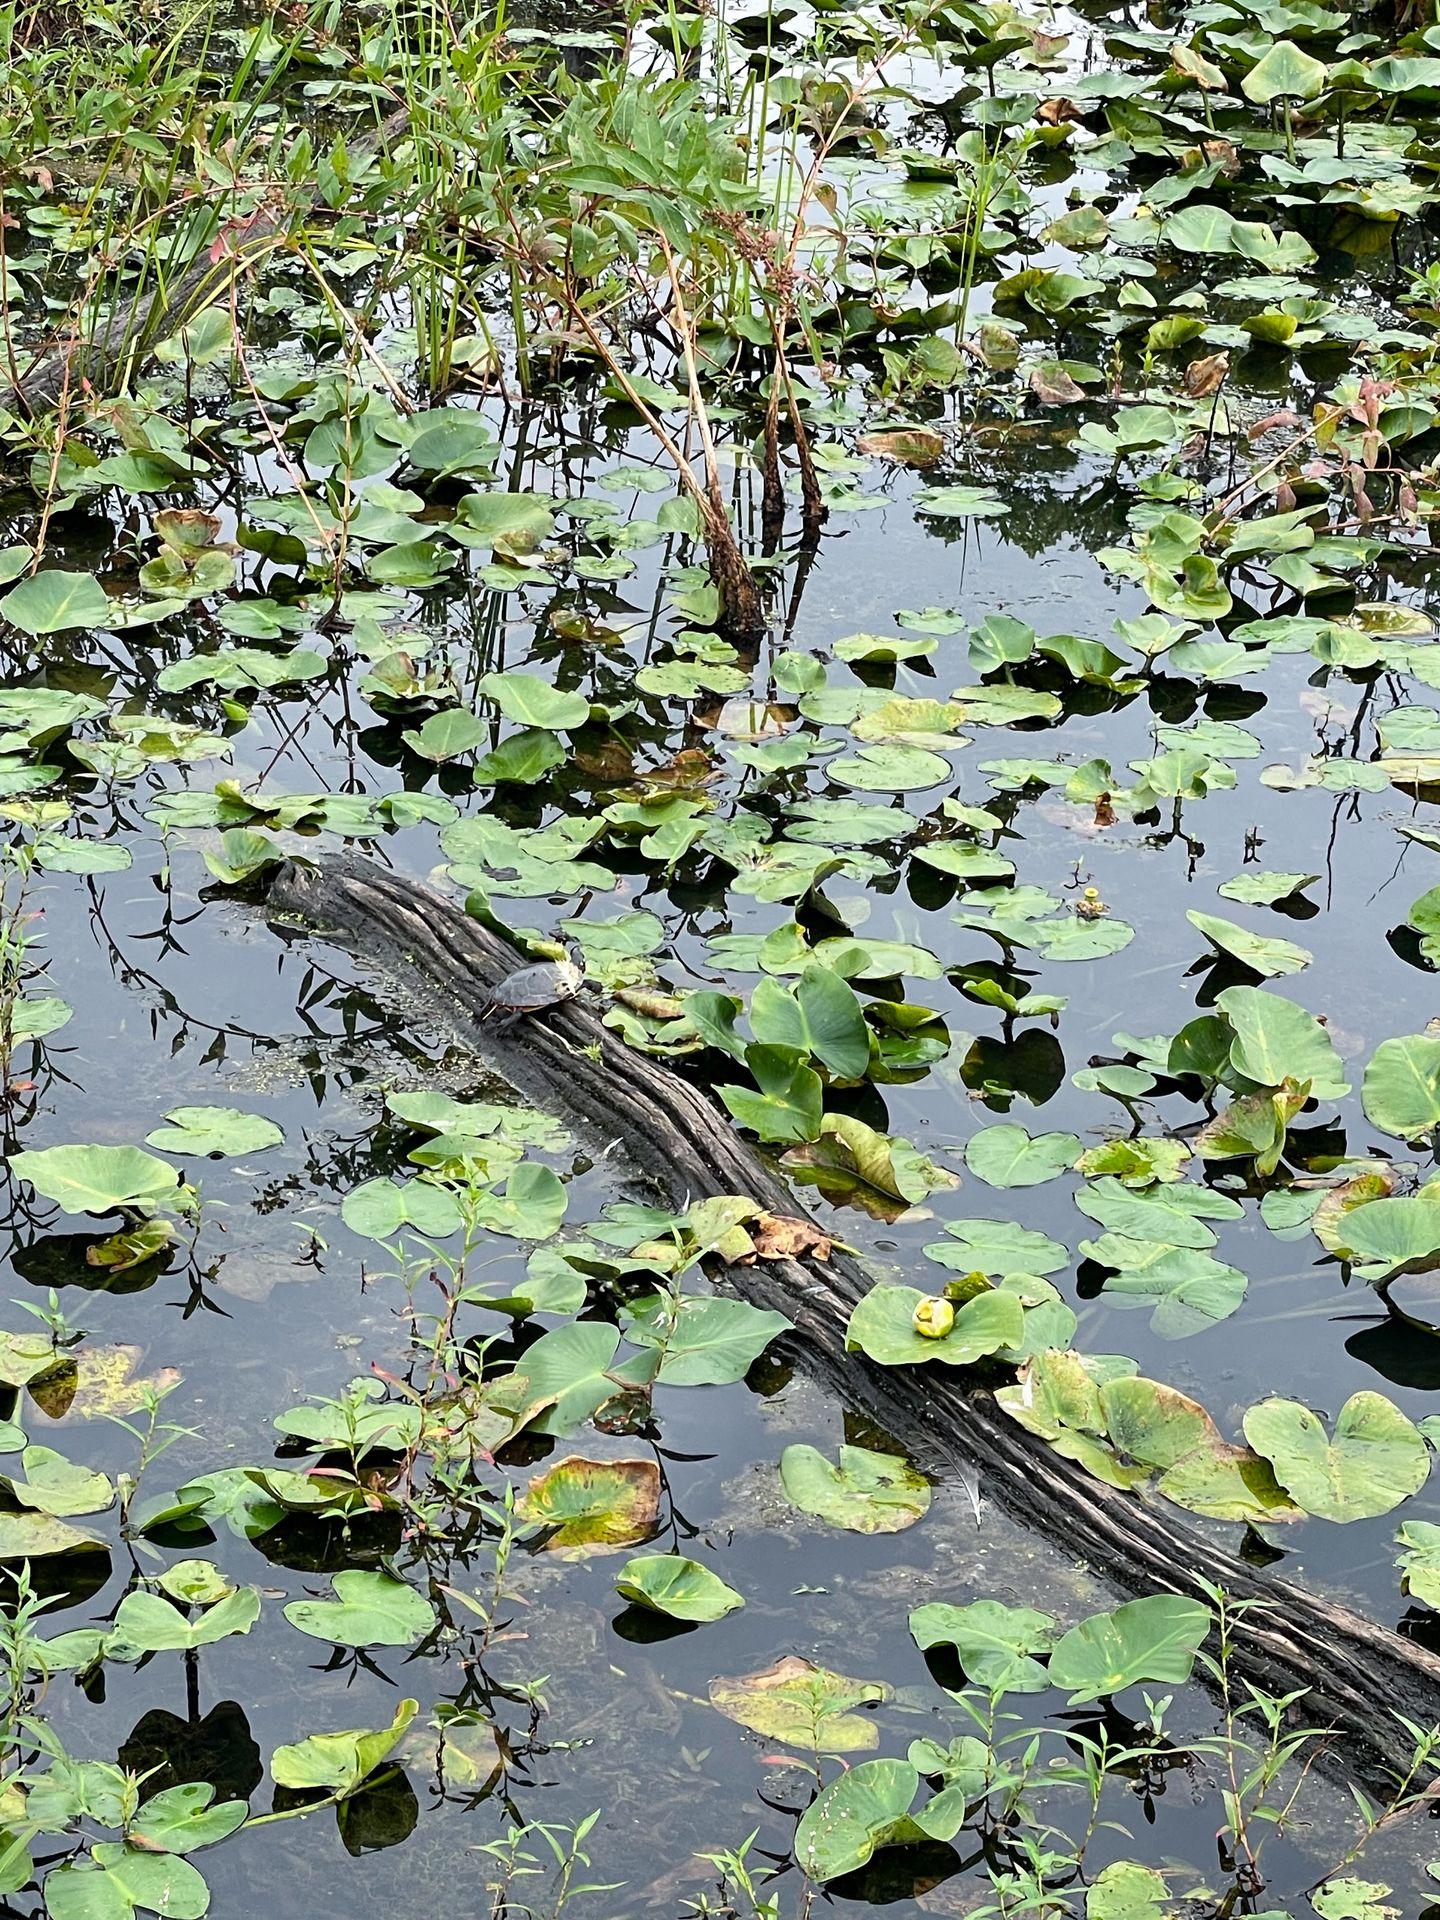 A marsh area with lily pads and a turtle sitting on a log.